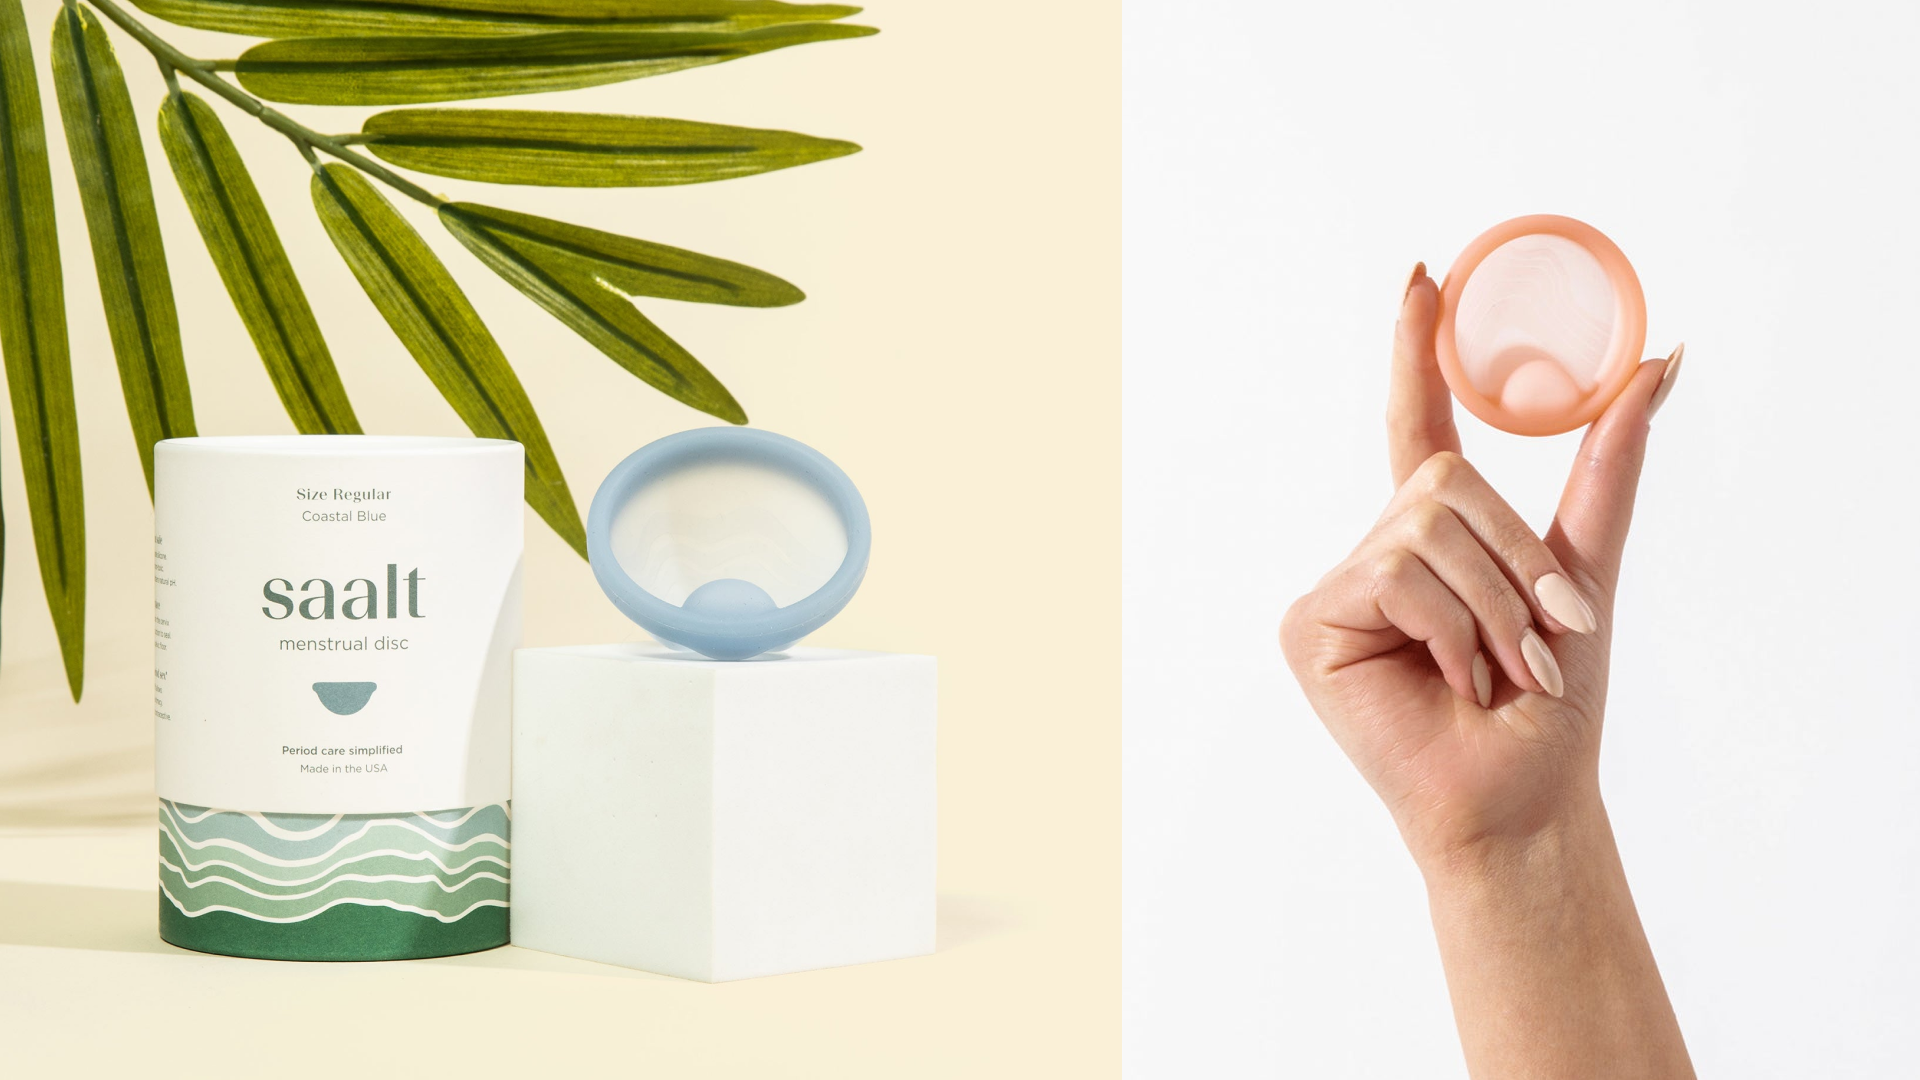 reusable and removable disc that is similar to a menstrual cup